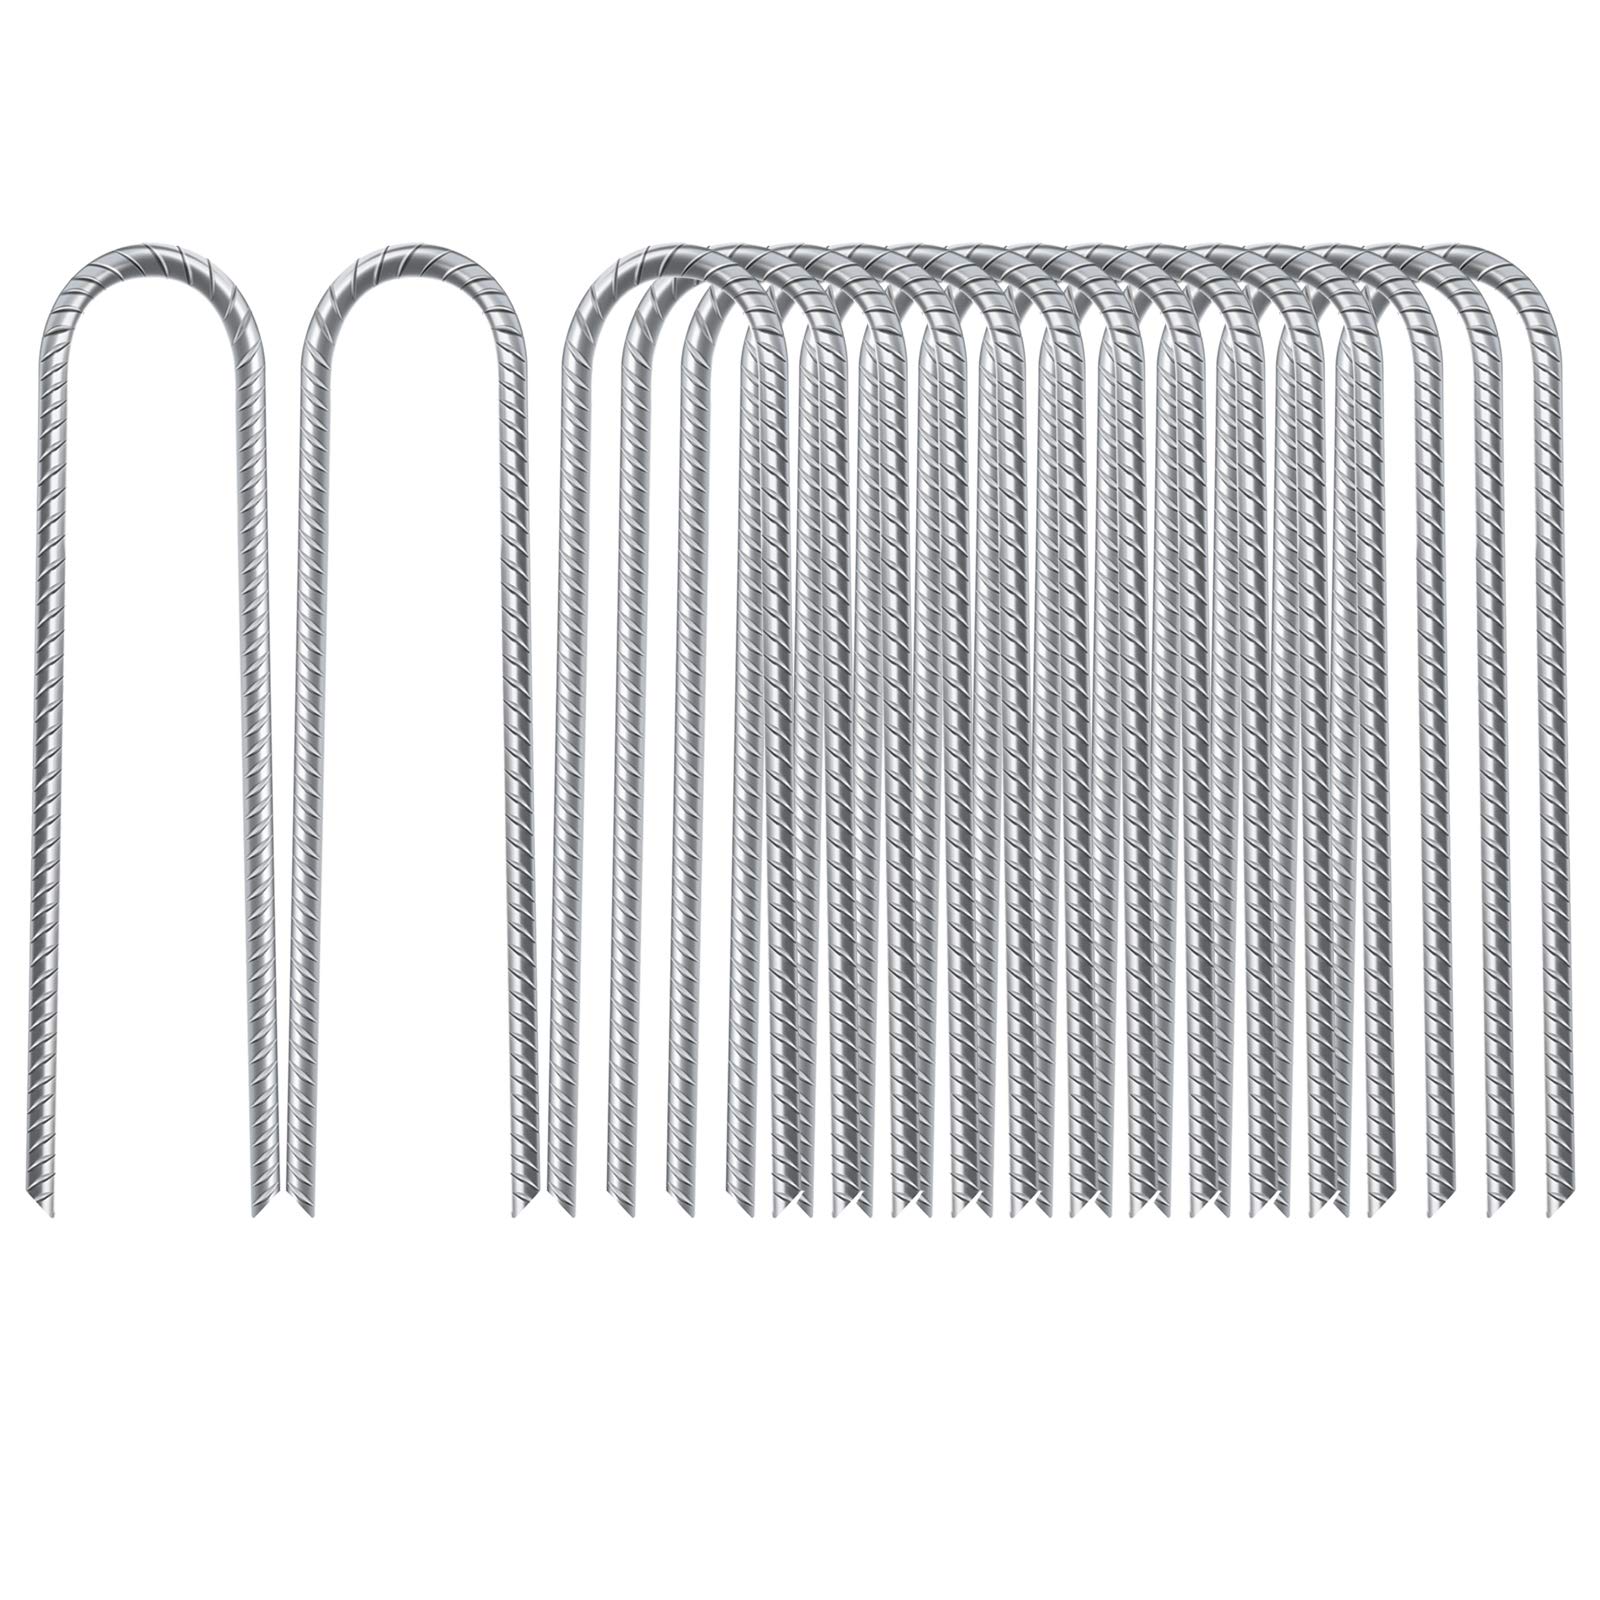 Feed Garden 16 Pack 12 Inch Galvanized Rebar Stakes U Hook Trampoline Anchors Heavy Duty Steel, High Wind Stakes For Anchoring T